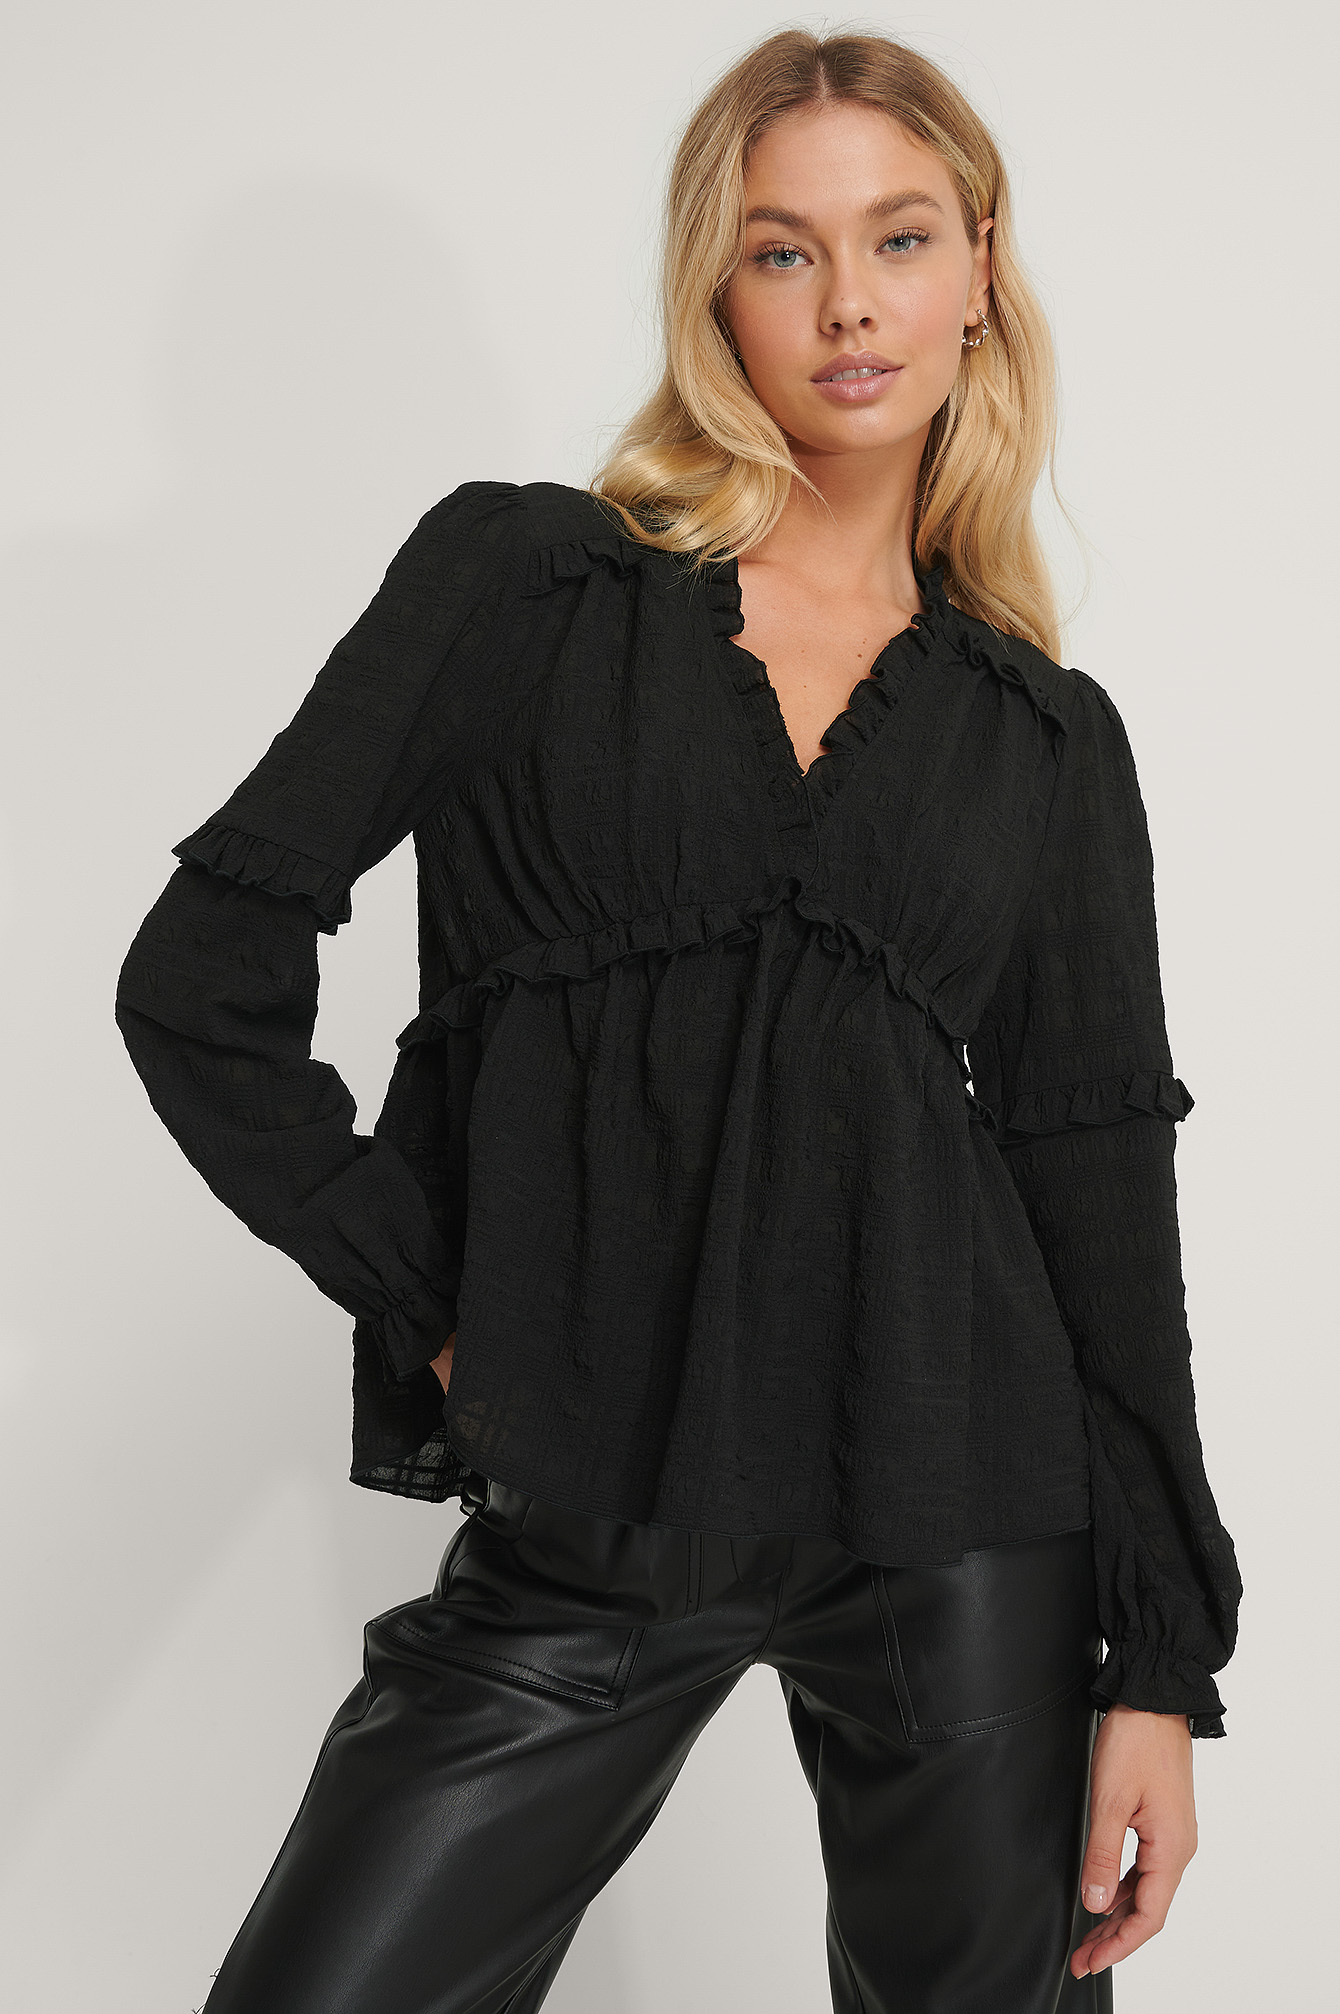 Black Structured Frill Blouse